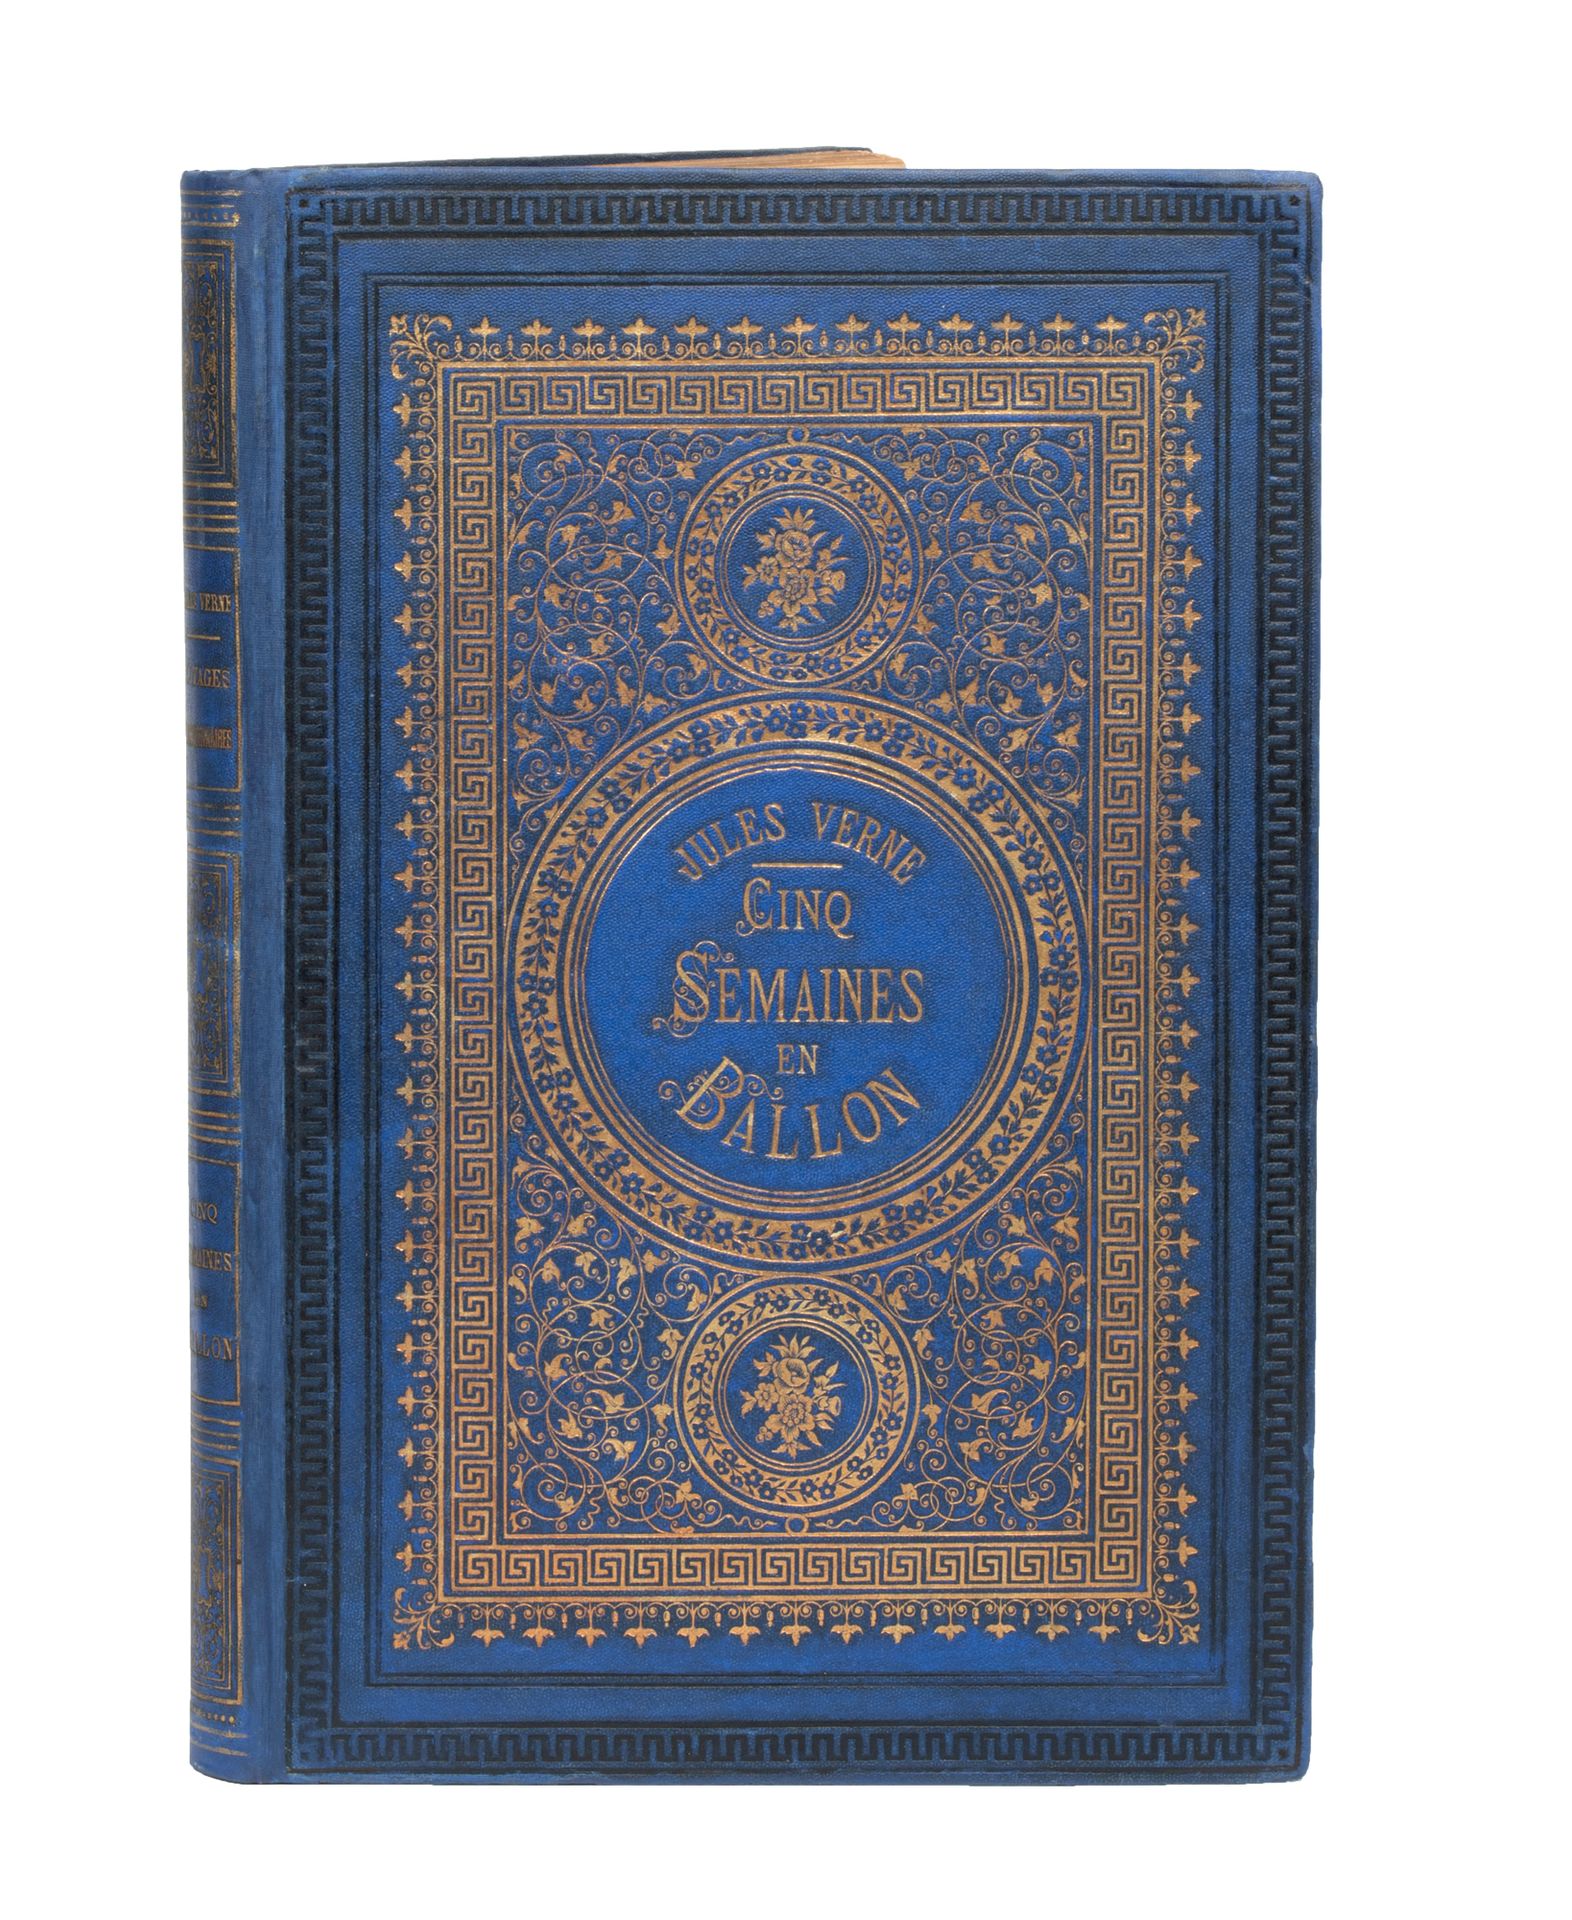 Null [Africa] Five weeks in a balloon by Jules Verne. Illustrations by Riou and &hellip;